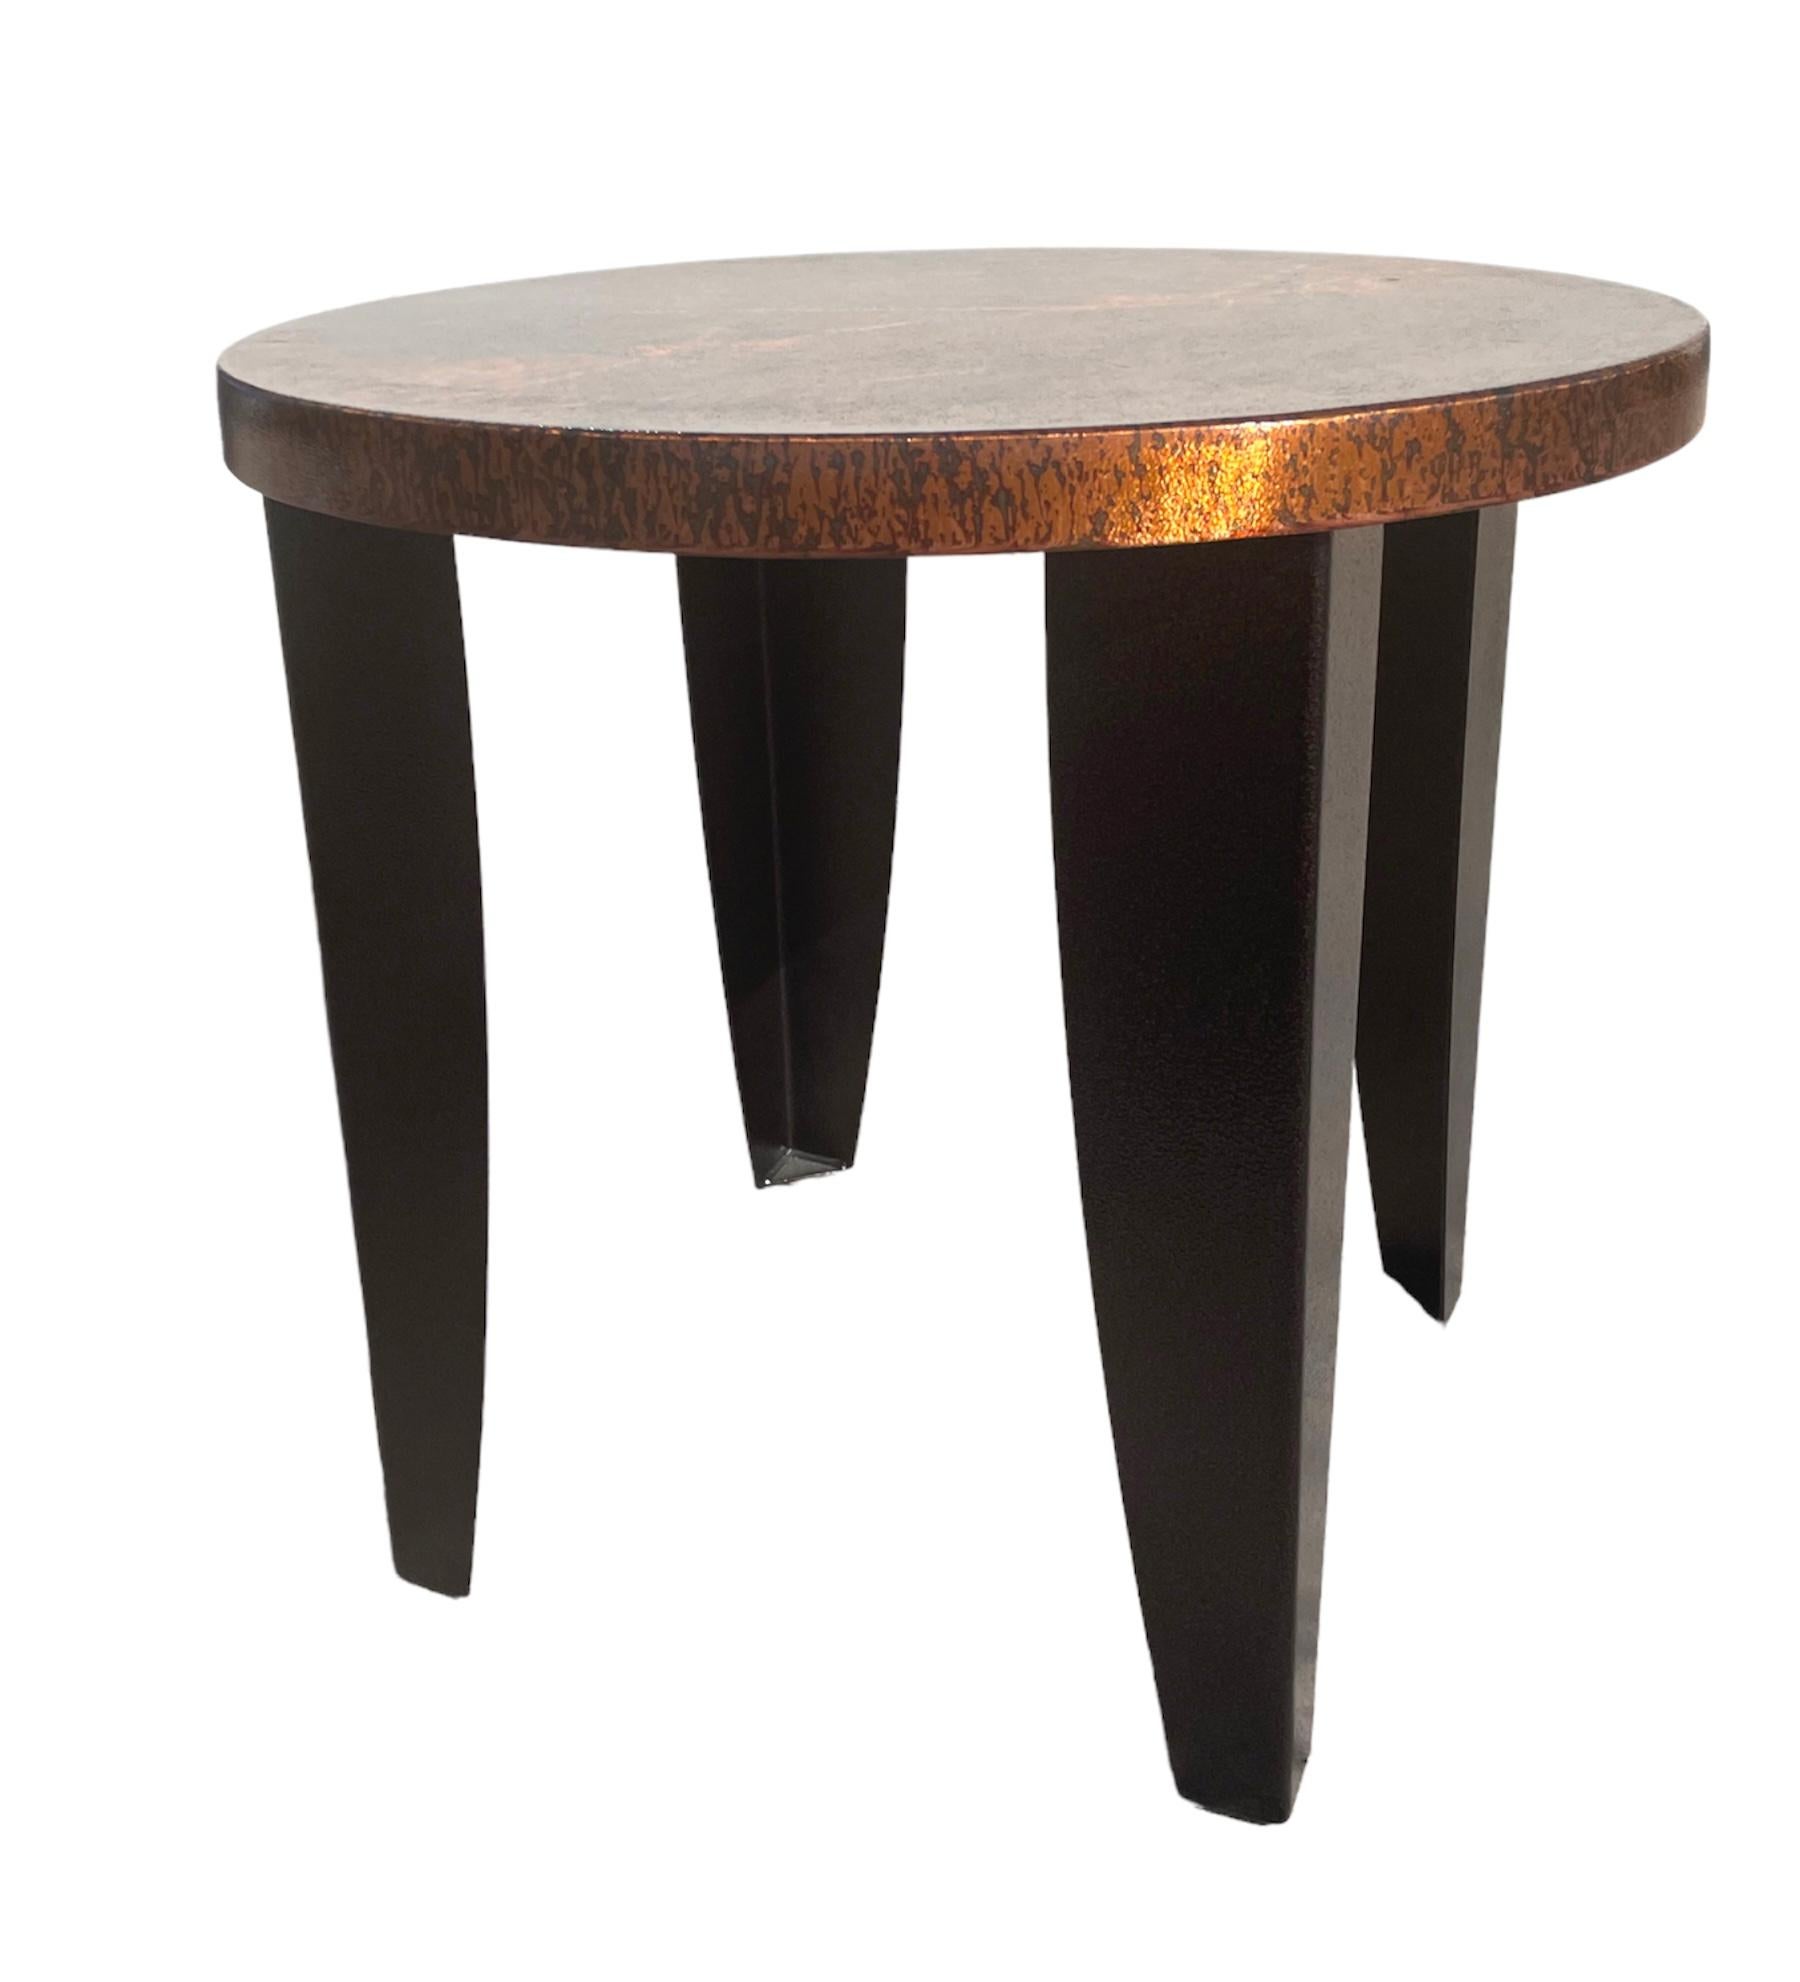 Oversized copper top and metal brownish back legs side tables, very cool look, the original owner said they were made in Mexico, vey stylish for a ranch or modern stately farm... or loft. solid and more beautiful in person.
